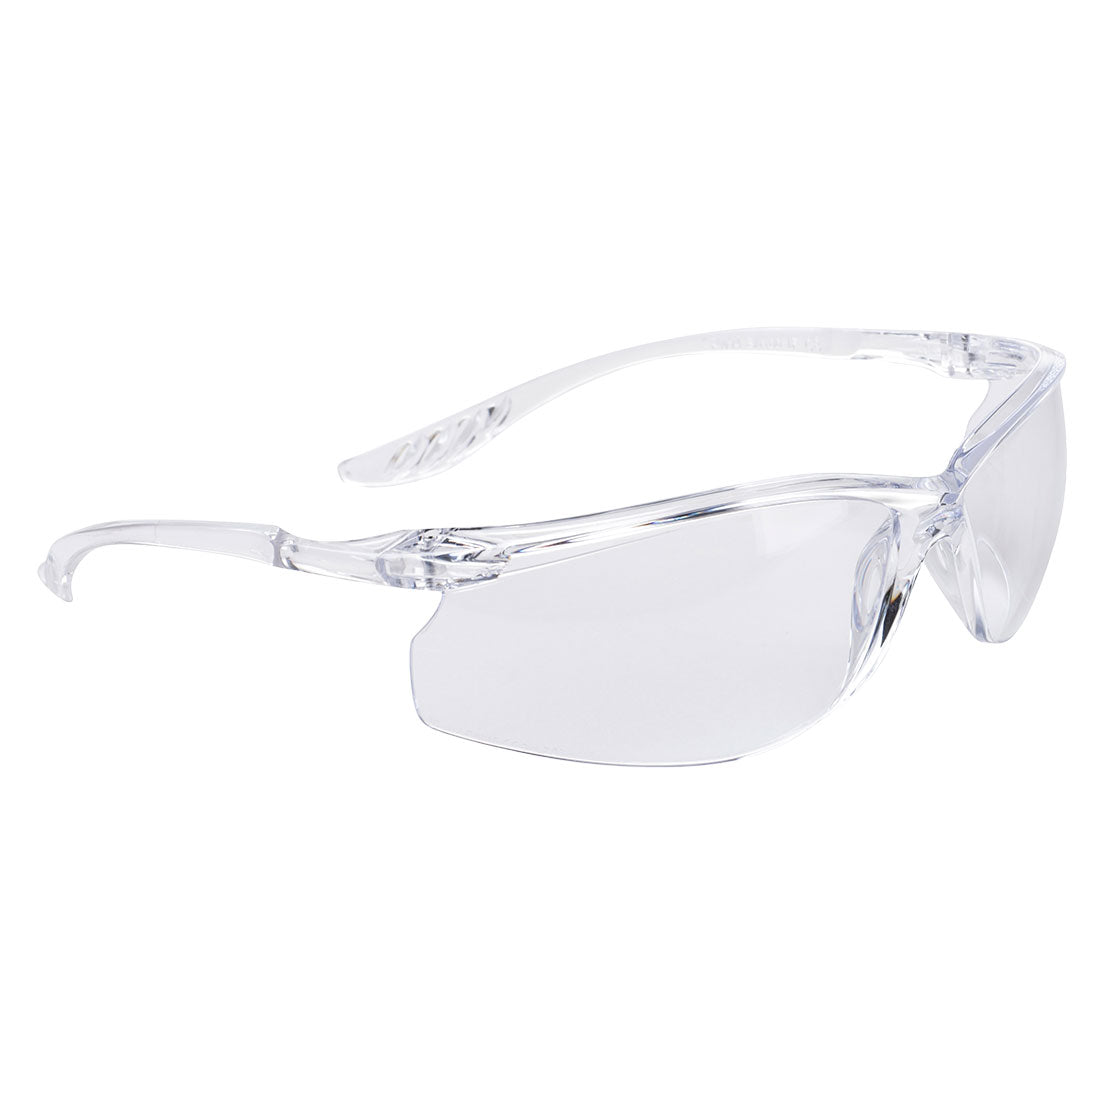 Lite Safety Spectacles  (PW14)